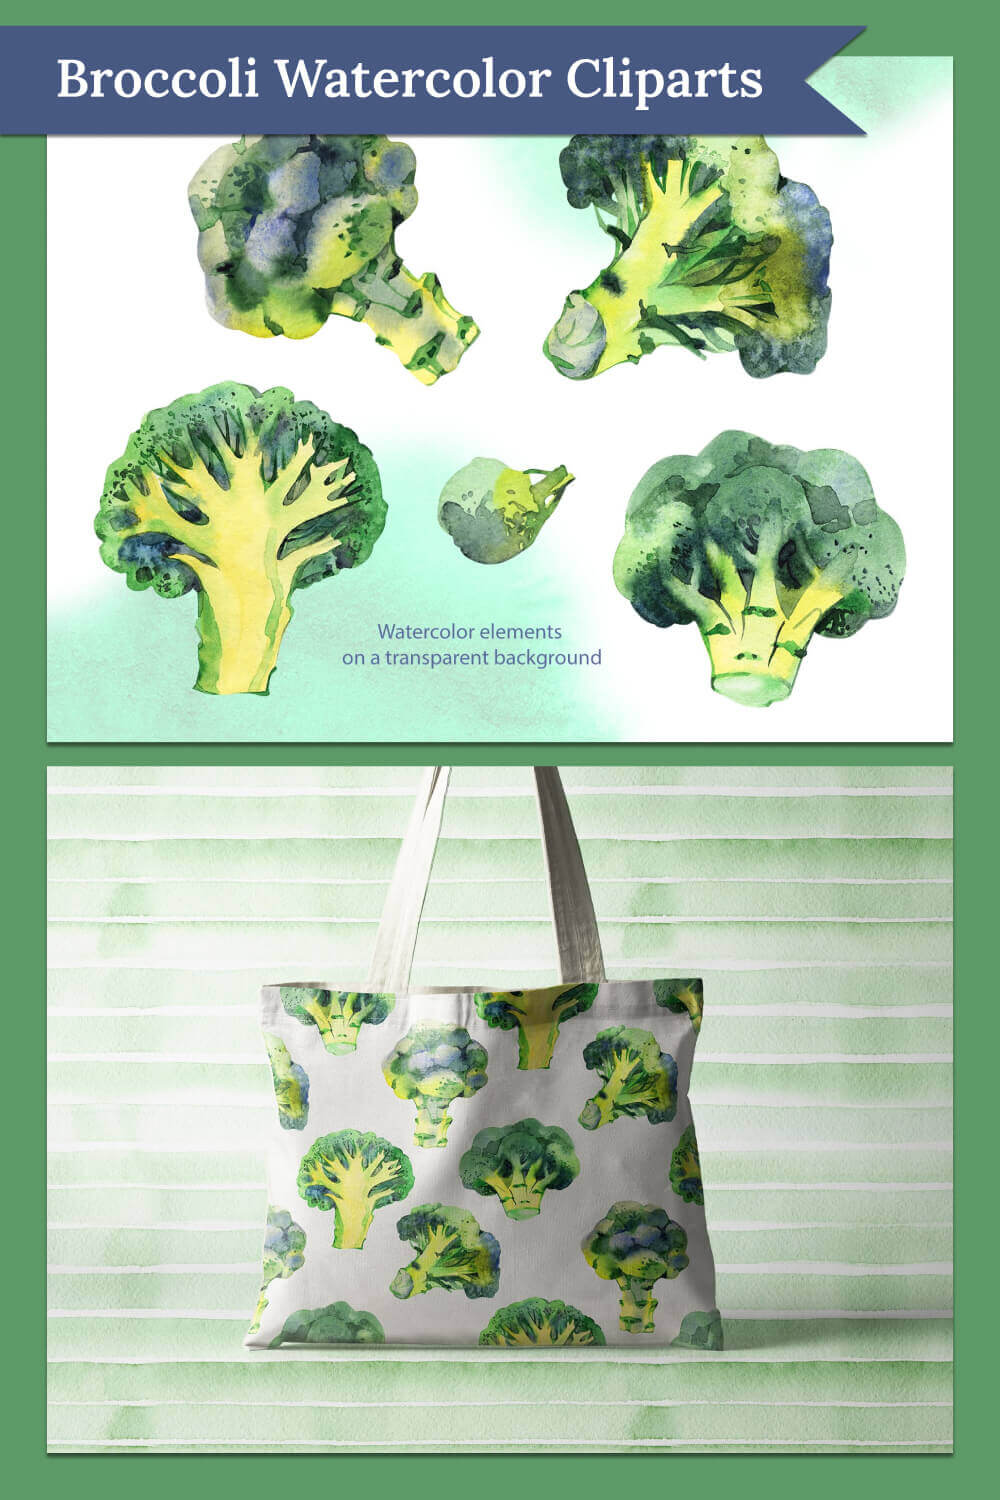 A watercolor green broccoli is depicted on a white bag.